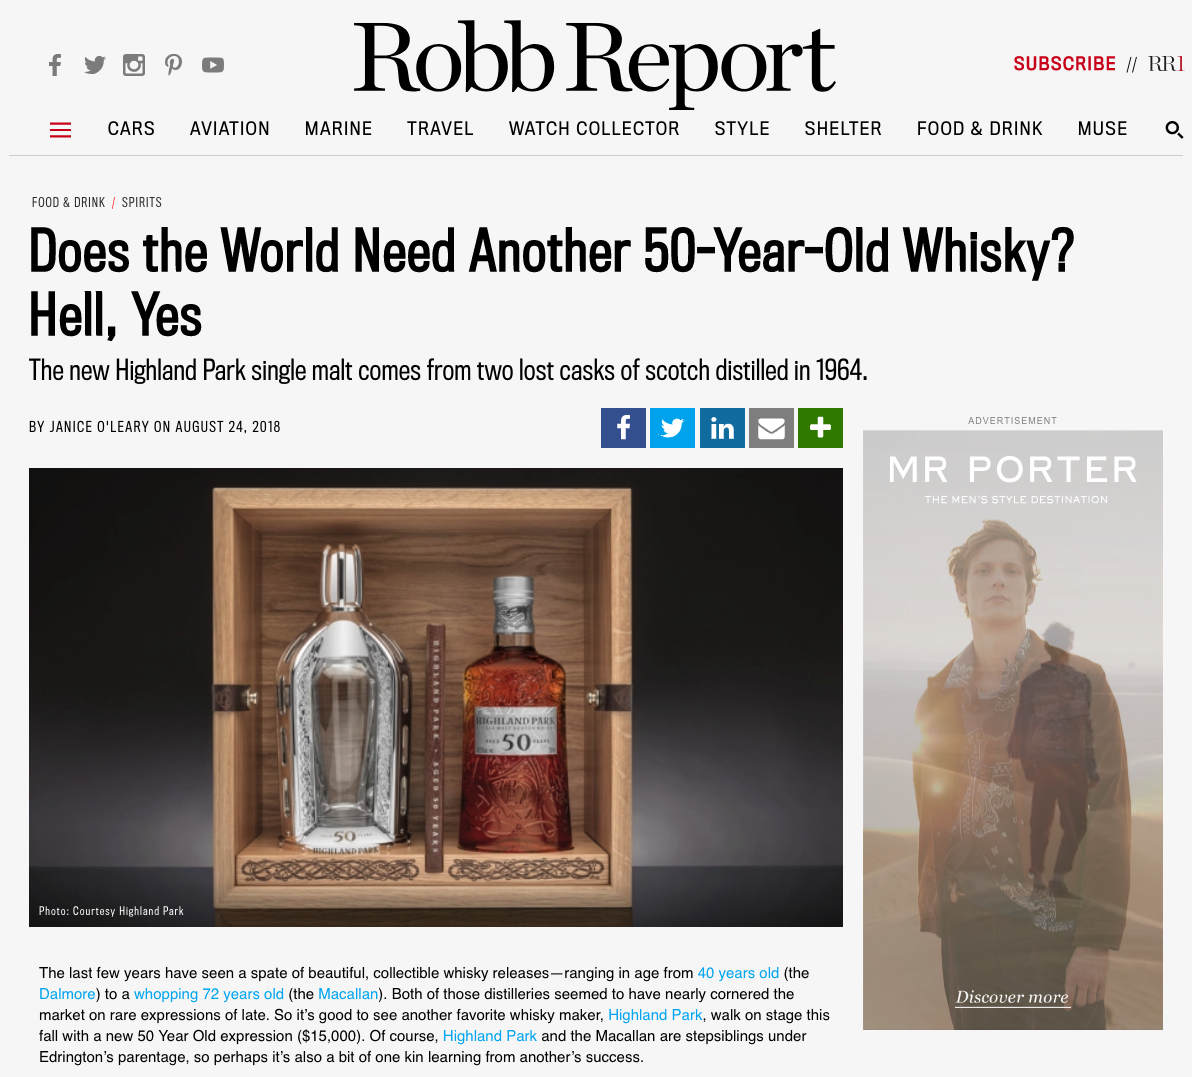 Robb Report features highland park